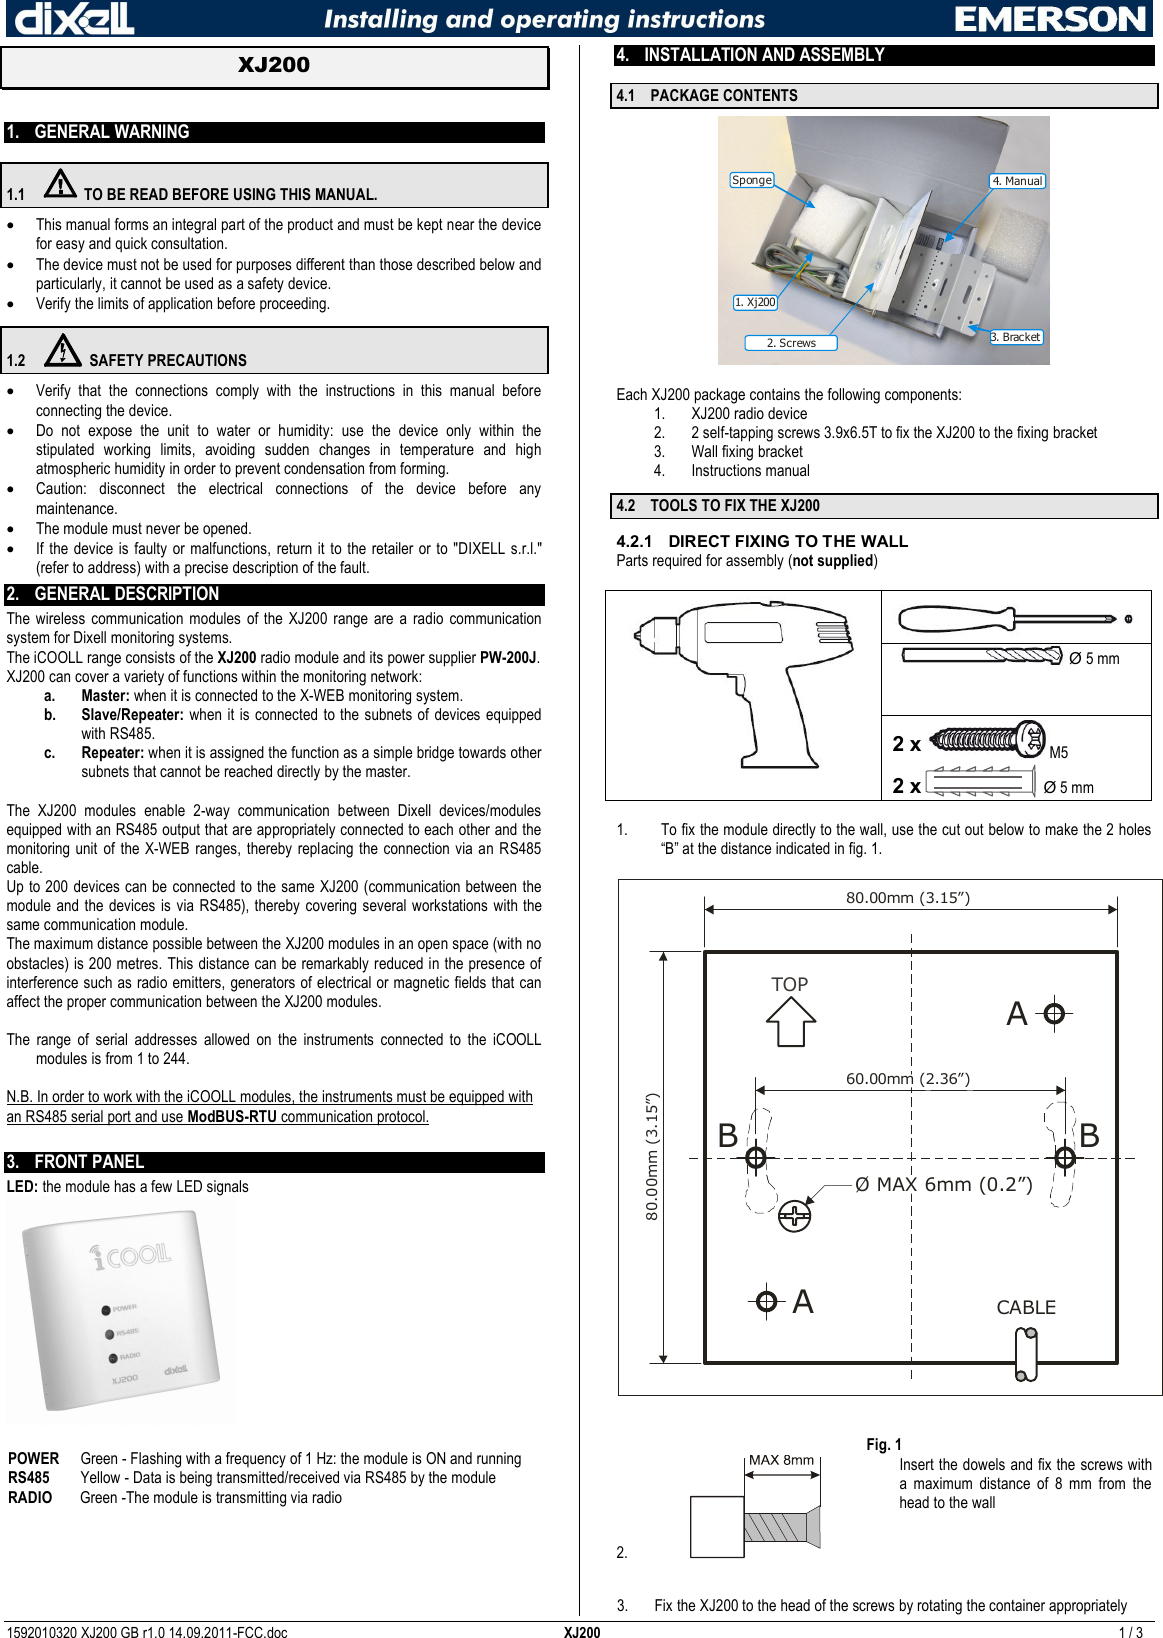  1592010320 XJ200 GB r1.0 14.09.2011-FCC.doc  XJ200  1 / 3  XJ200   1. GENERAL WARNING 1.1  TO BE READ BEFORE USING THIS MANUAL.  This manual forms an integral part of the product and must be kept near the device for easy and quick consultation.  The device must not be used for purposes different than those described below and particularly, it cannot be used as a safety device.  Verify the limits of application before proceeding. 1.2  SAFETY PRECAUTIONS  Verify  that  the  connections  comply  with  the  instructions  in  this  manual  before connecting the device.  Do  not  expose  the  unit  to  water  or  humidity:  use  the  device  only  within  the stipulated  working  limits,  avoiding  sudden  changes  in  temperature  and  high atmospheric humidity in order to prevent condensation from forming.  Caution:  disconnect  the  electrical  connections  of  the  device  before  any maintenance.  The module must never be opened.   If  the device  is faulty  or malfunctions, return it to  the retailer  or to  &quot;DIXELL s.r.l.&quot; (refer to address) with a precise description of the fault. 2. GENERAL DESCRIPTION  The  wireless  communication  modules  of the  XJ200  range  are  a  radio communication system for Dixell monitoring systems.  The iCOOLL range consists of the XJ200 radio module and its power supplier PW-200J. XJ200 can cover a variety of functions within the monitoring network: a. Master: when it is connected to the X-WEB monitoring system. b. Slave/Repeater: when it  is  connected  to the  subnets of devices equipped with RS485. c. Repeater: when it is assigned the function as a simple bridge towards other subnets that cannot be reached directly by the master.  The  XJ200  modules  enable  2-way  communication  between  Dixell  devices/modules equipped with an RS485 output that are appropriately connected to each other and the monitoring  unit  of the X-WEB  ranges,  thereby  replacing the  connection  via an RS485 cable.  Up to 200 devices can be connected to the same XJ200 (communication between the module and  the  devices  is via RS485), thereby covering  several  workstations with the same communication module.  The maximum distance possible between the XJ200 modules in an open space (with no obstacles) is 200 metres. This distance can be remarkably reduced in the presence of interference such as radio emitters, generators of electrical or magnetic fields that can affect the proper communication between the XJ200 modules.  The  range  of  serial  addresses  allowed  on  the  instruments  connected  to  the  iCOOLL modules is from 1 to 244.  N.B. In order to work with the iCOOLL modules, the instruments must be equipped with an RS485 serial port and use ModBUS-RTU communication protocol.  3. FRONT PANEL  LED: the module has a few LED signals   POWER  Green - Flashing with a frequency of 1 Hz: the module is ON and running RS485  Yellow - Data is being transmitted/received via RS485 by the module RADIO  Green -The module is transmitting via radio   4. INSTALLATION AND ASSEMBLY  4.1 PACKAGE CONTENTS 3. Bracket4. Manual1. Xj200Sponge2. Screws  Each XJ200 package contains the following components: 1. XJ200 radio device 2. 2 self-tapping screws 3.9x6.5T to fix the XJ200 to the fixing bracket 3. Wall fixing bracket 4. Instructions manual 4.2 TOOLS TO FIX THE XJ200 4.2.1  DIRECT FIXING TO THE WALL Parts required for assembly (not supplied)     Ø 5 mm  2 x M5 2 x    Ø 5 mm  1. To fix the module directly to the wall, use the cut out below to make the 2 holes “B” at the distance indicated in fig. 1.  TOPØ MAX 6mm (0.2”)80.00mm (3.15”)80.00mm (3.15”)60.00mm (2.36”)CABLEAAB B  Fig. 1 2.   Insert the dowels and fix the screws with a  maximum  distance  of  8  mm  from  the head to the wall  3. Fix the XJ200 to the head of the screws by rotating the container appropriately  